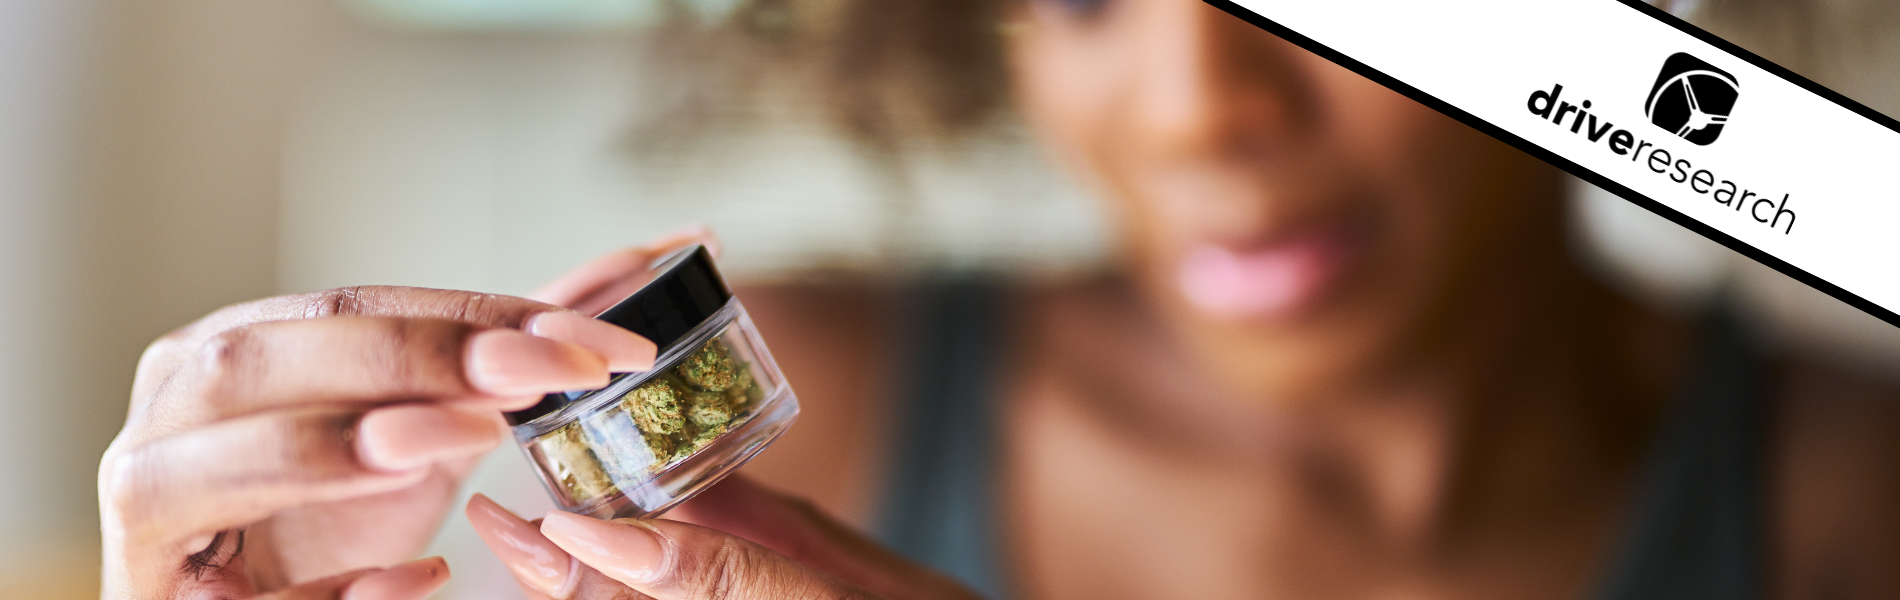 african woman looking at cannabis bottle close up